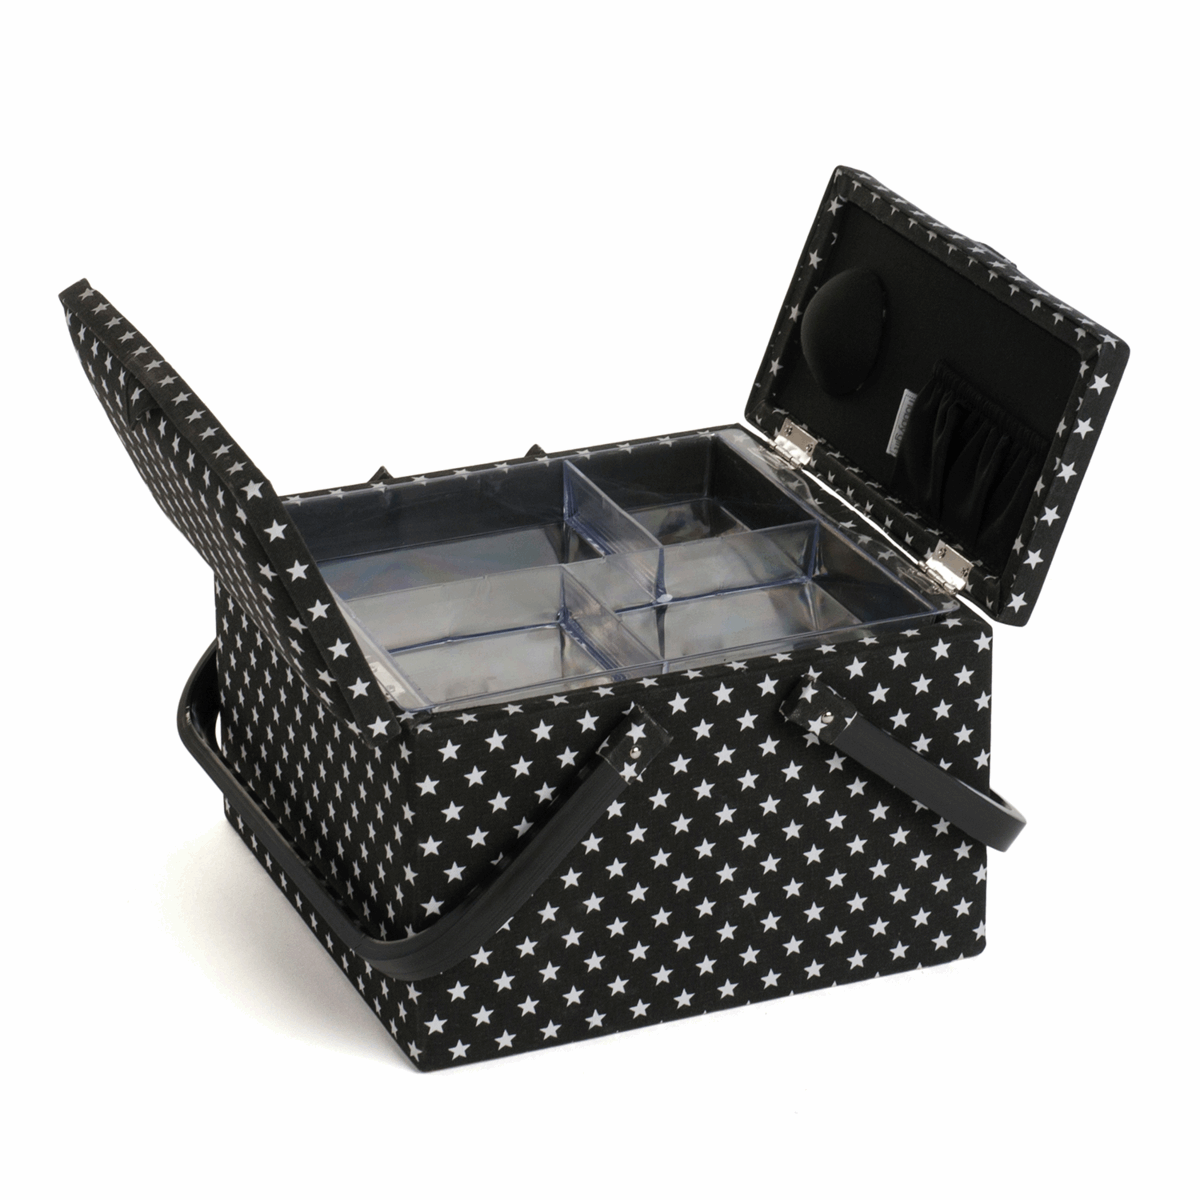 Black Star Design Sewing Box with Twin Lid - Large Square